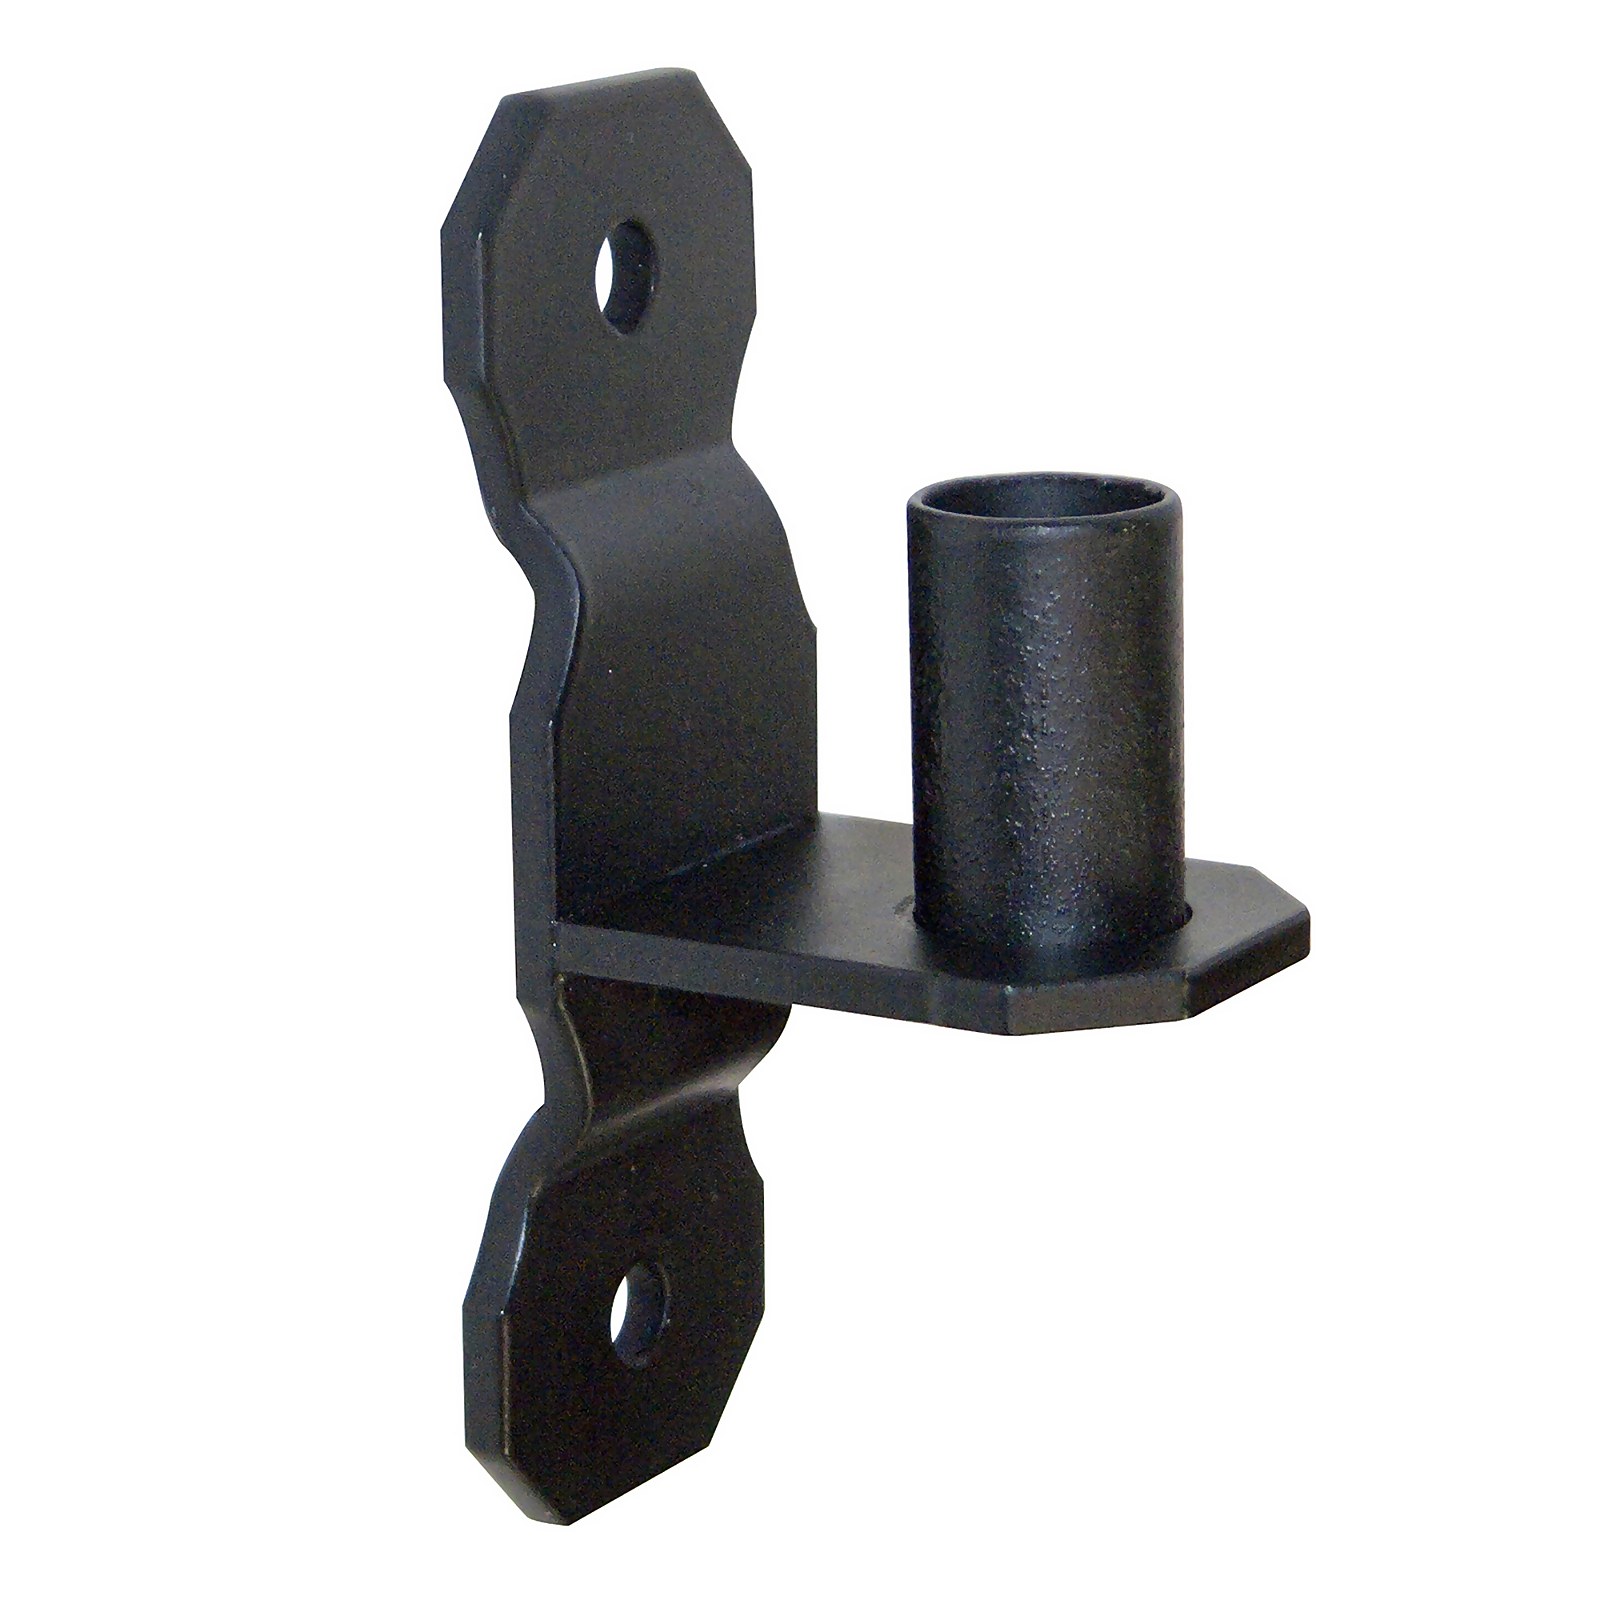 Photo of Wall Mount Brackets - 2 Pack